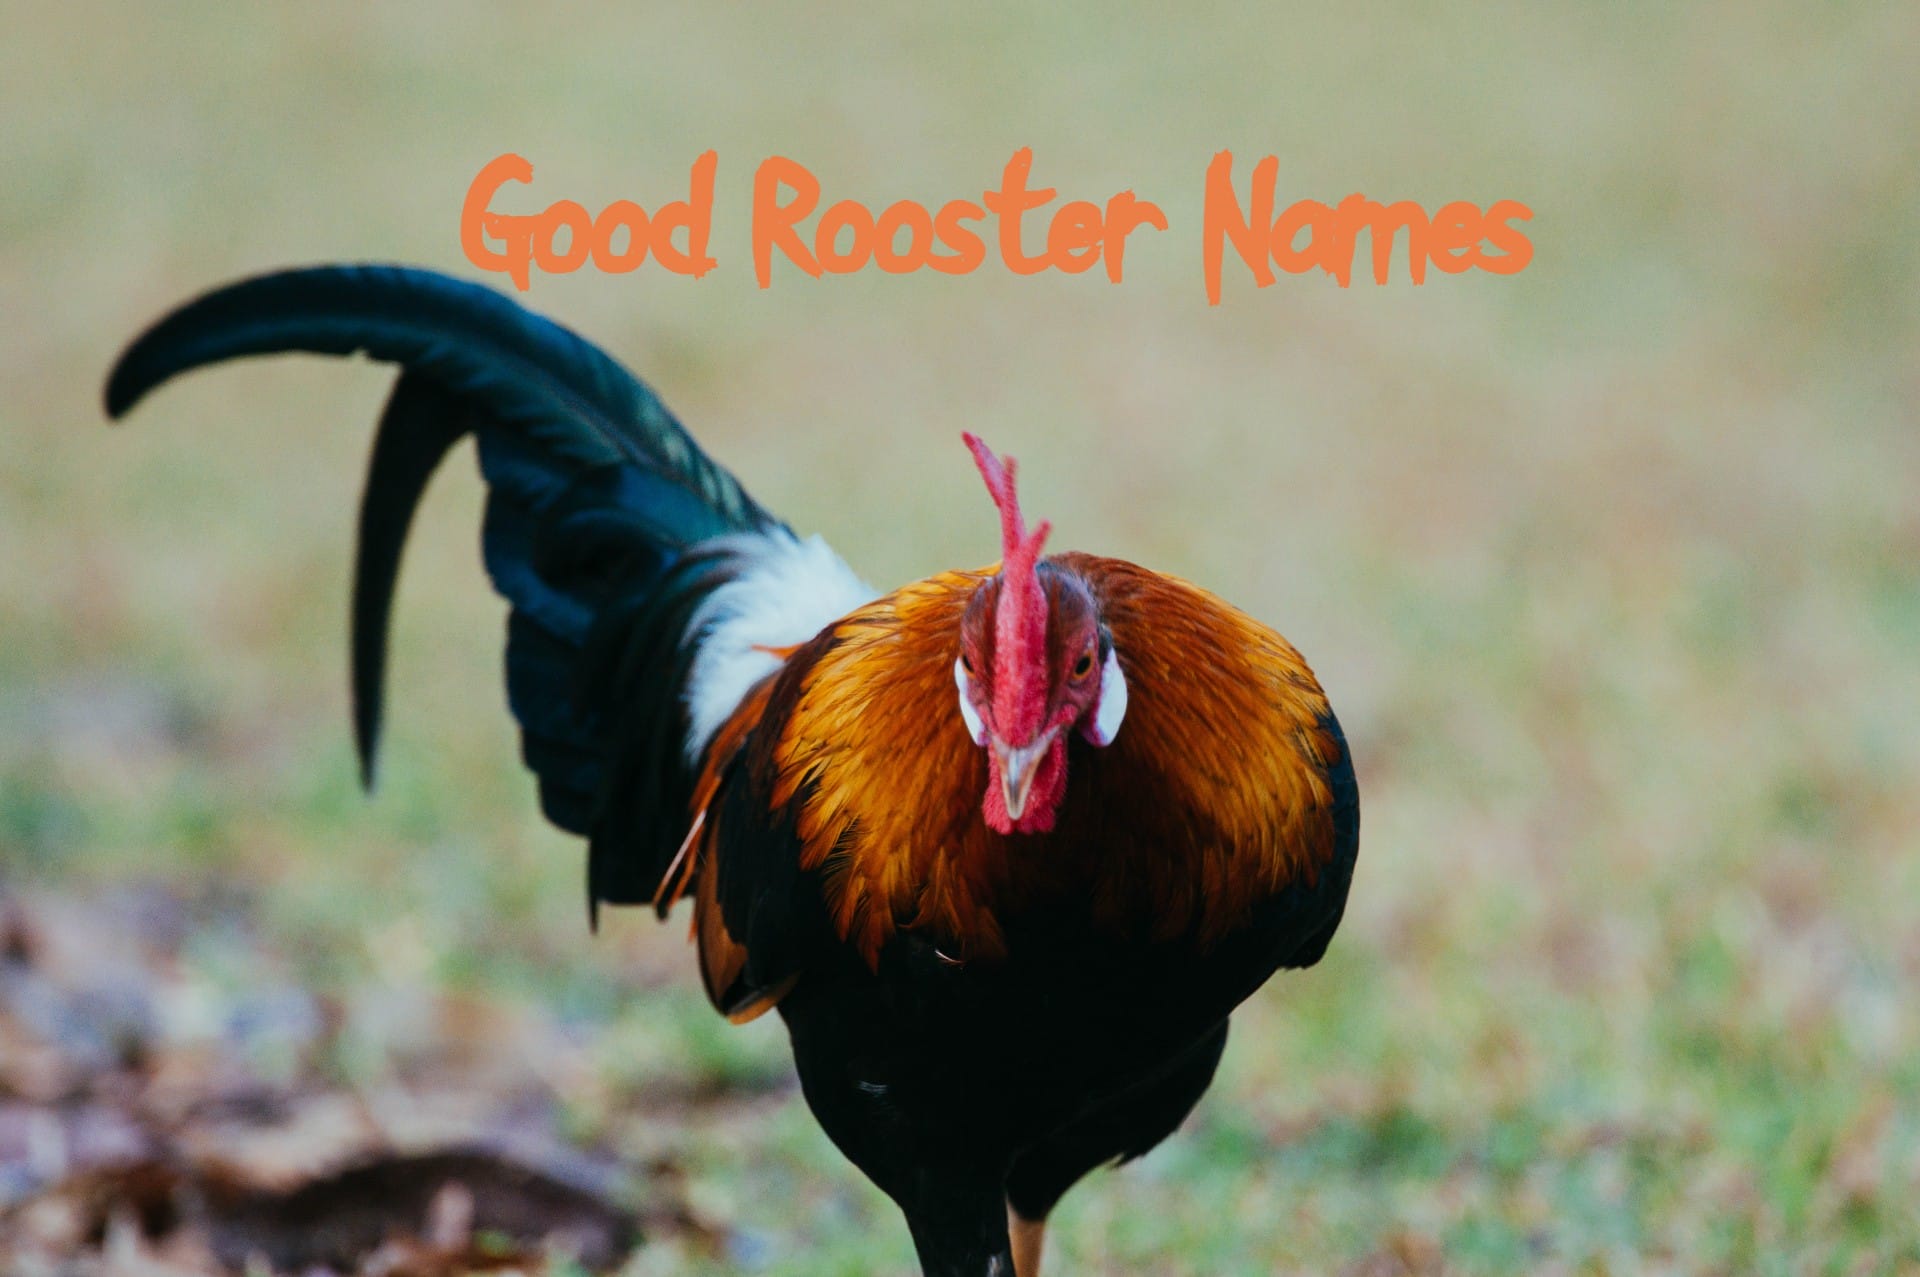 190+ Good Rooster Names – Cute, Cool, & Unique Names For A Rooster